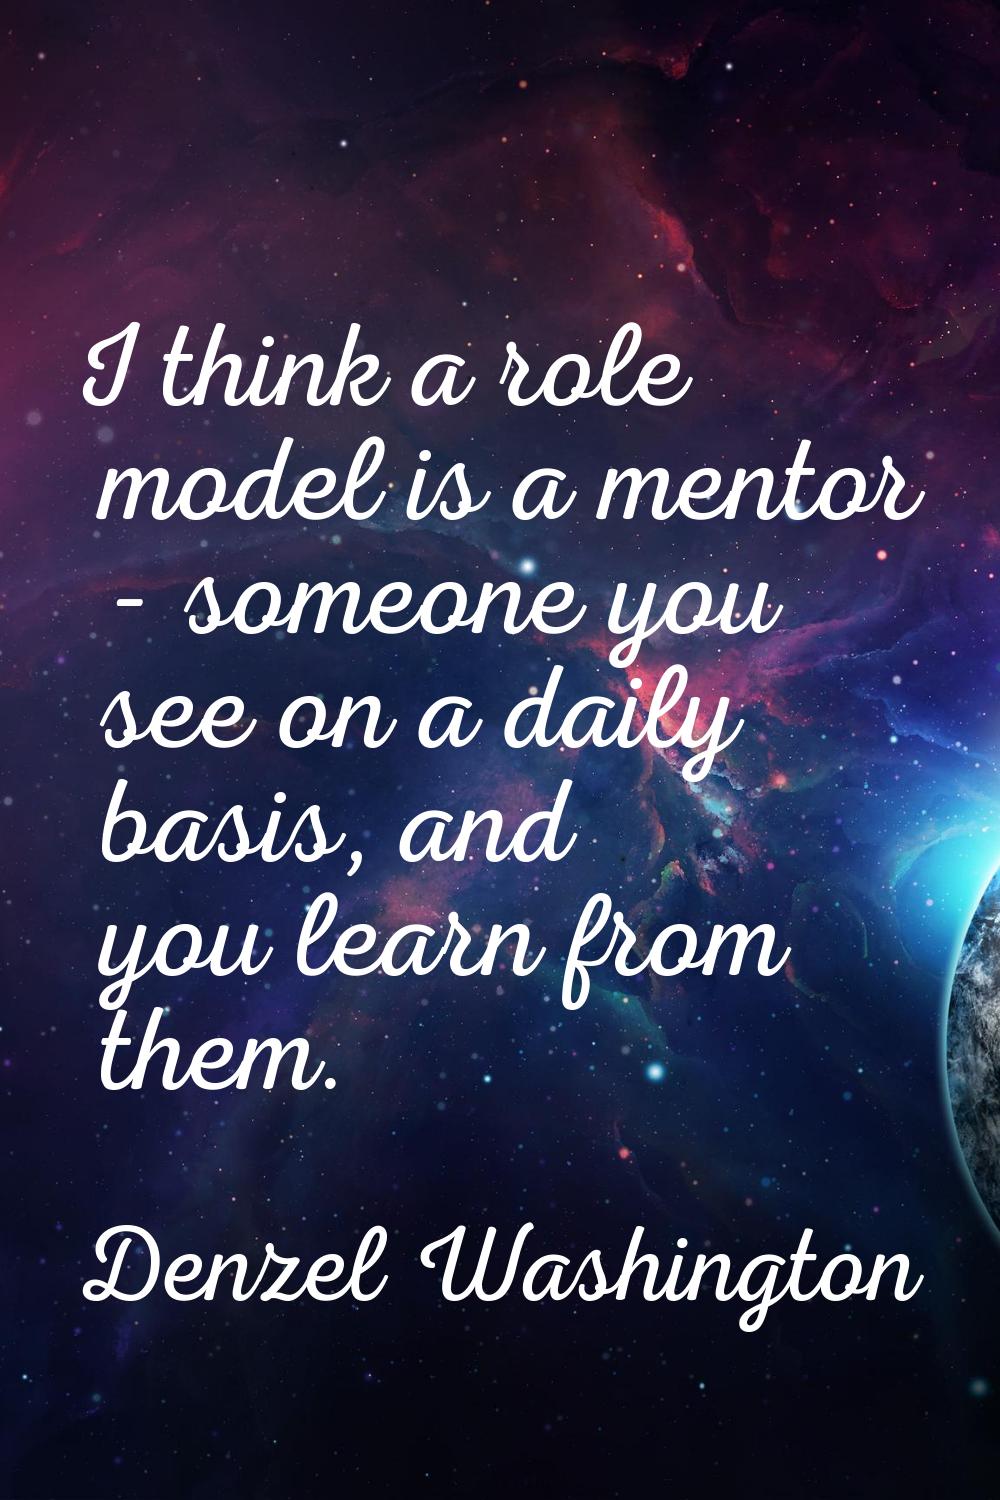 I think a role model is a mentor - someone you see on a daily basis, and you learn from them.